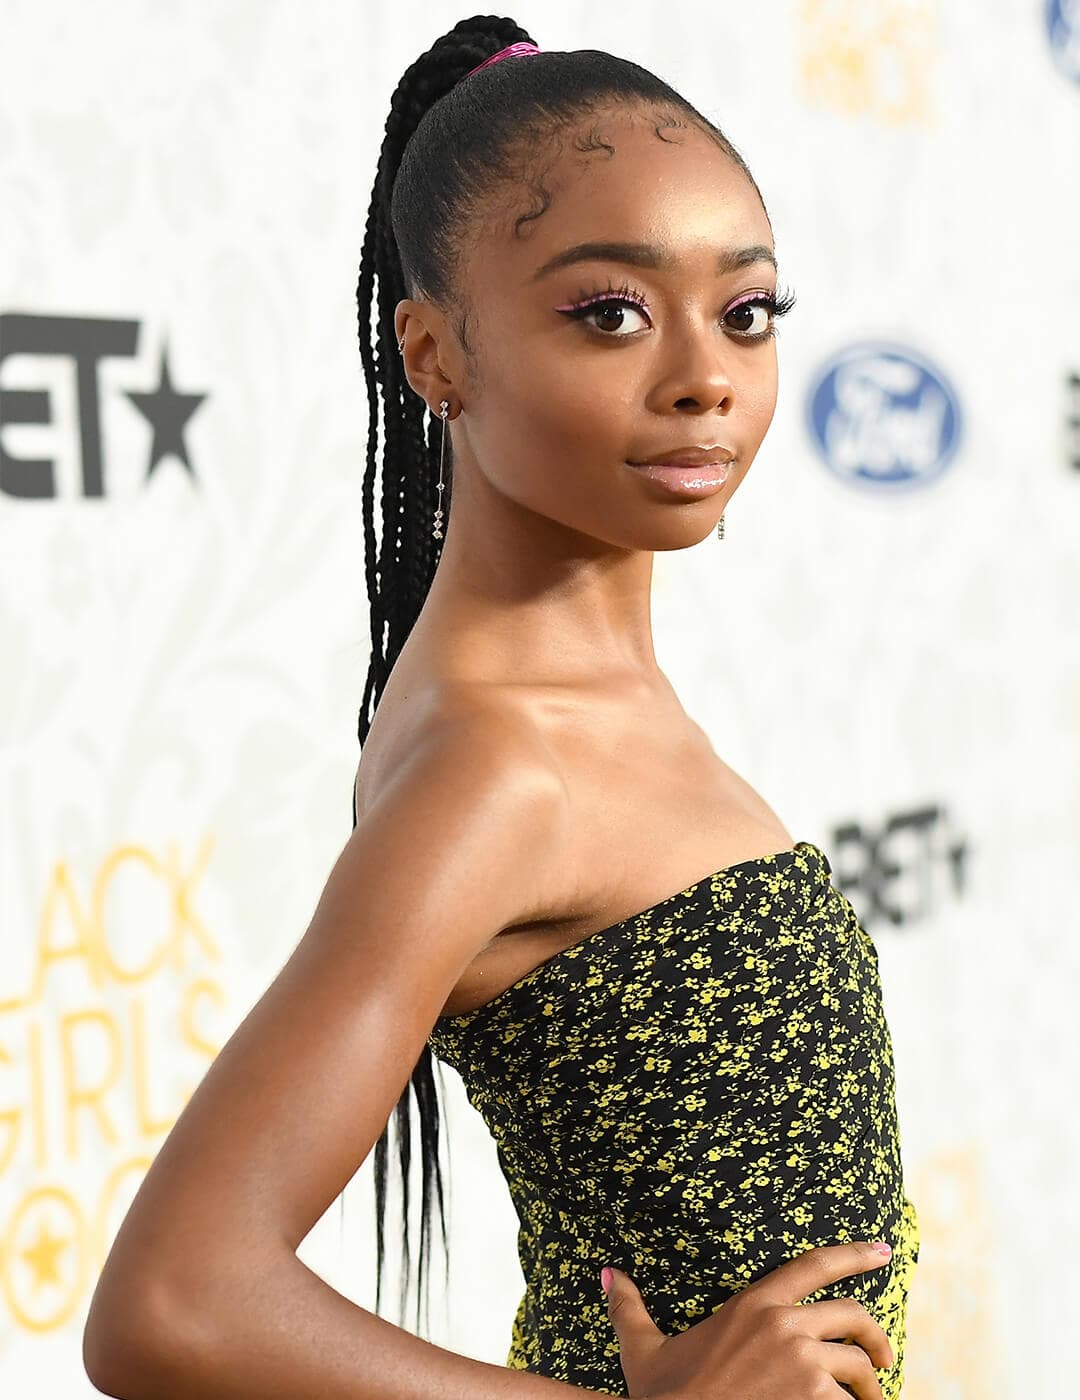 Skai Jackson looking glamorous in a yellow and black tube dress and braided ponytail hairstyle